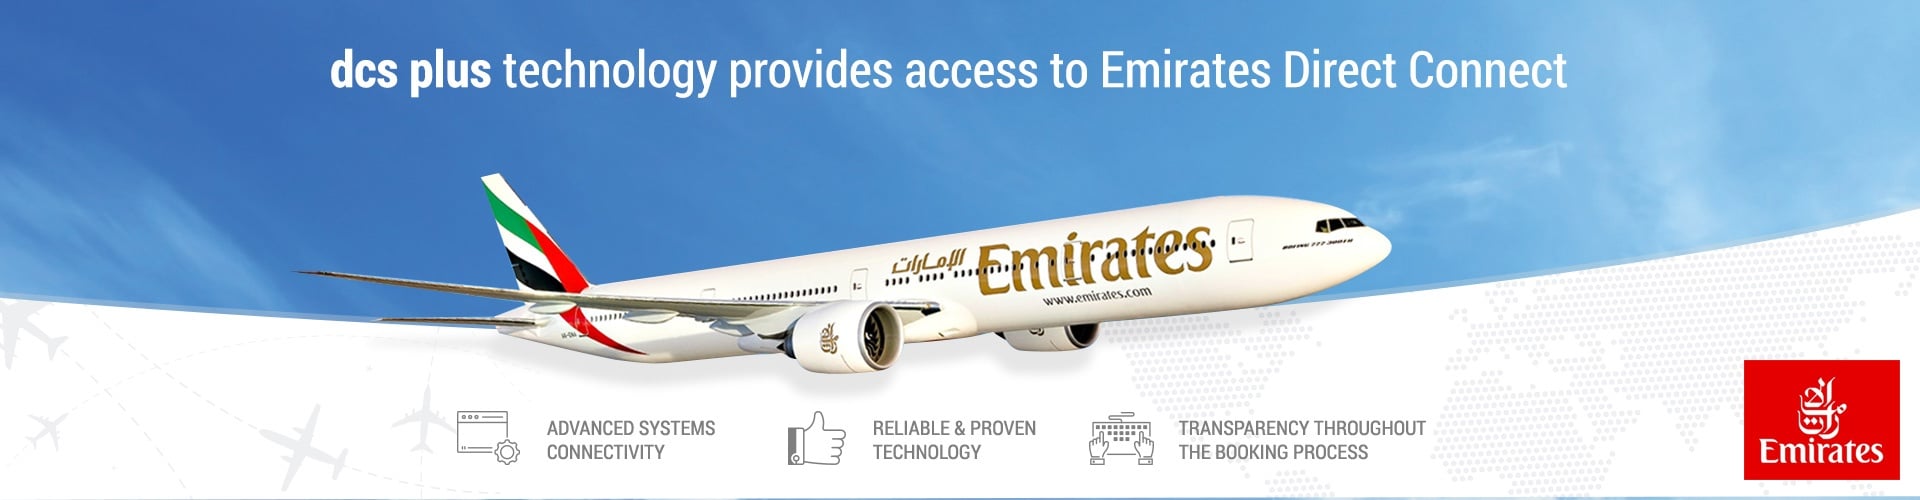 dcs plus technology provides access to Emirates direct connect